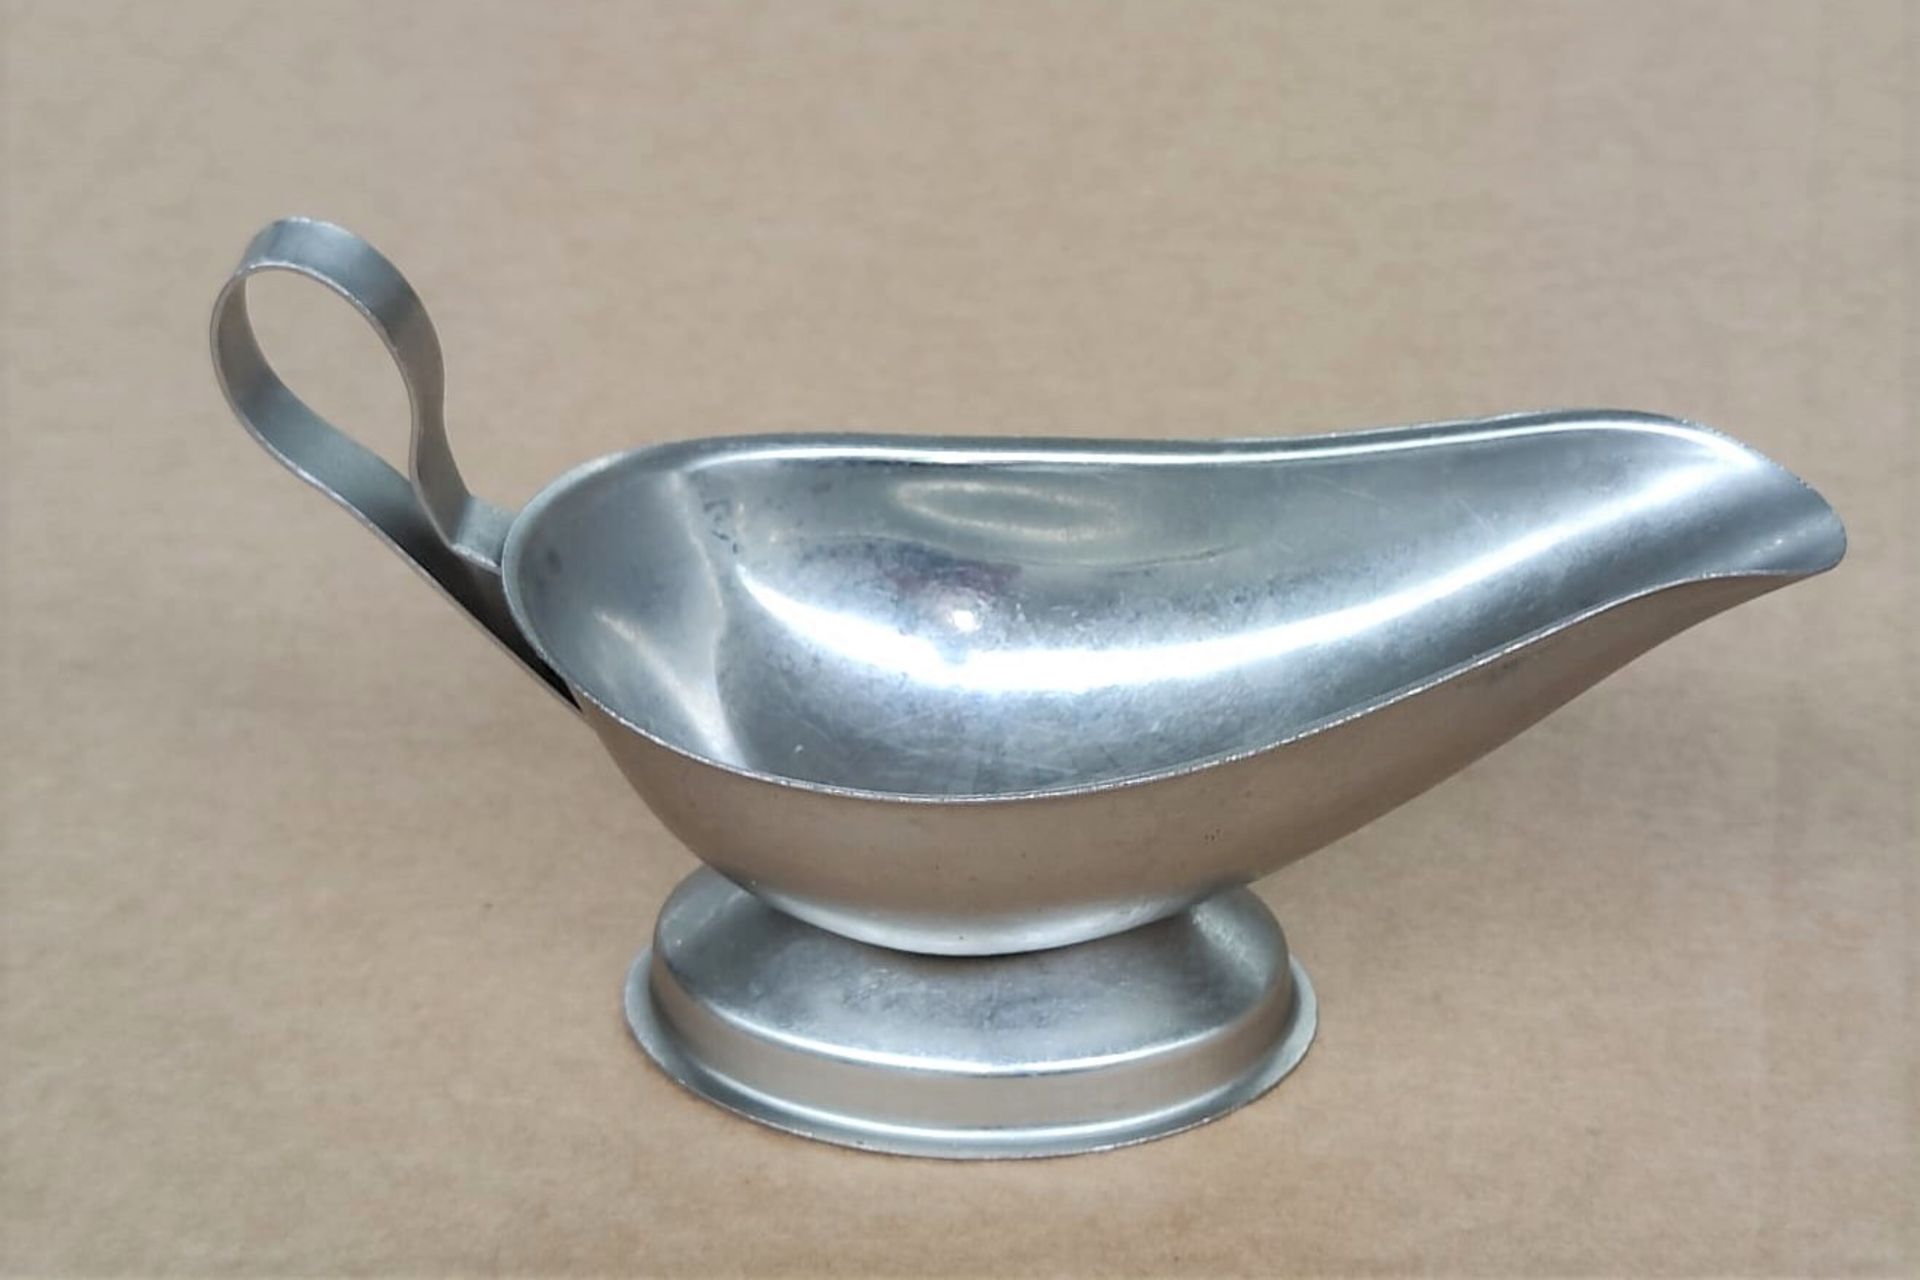 30 x Stainless Steel Sauce & Gravy Boats - Size: 130mm Wide Without Handle - Image 3 of 5